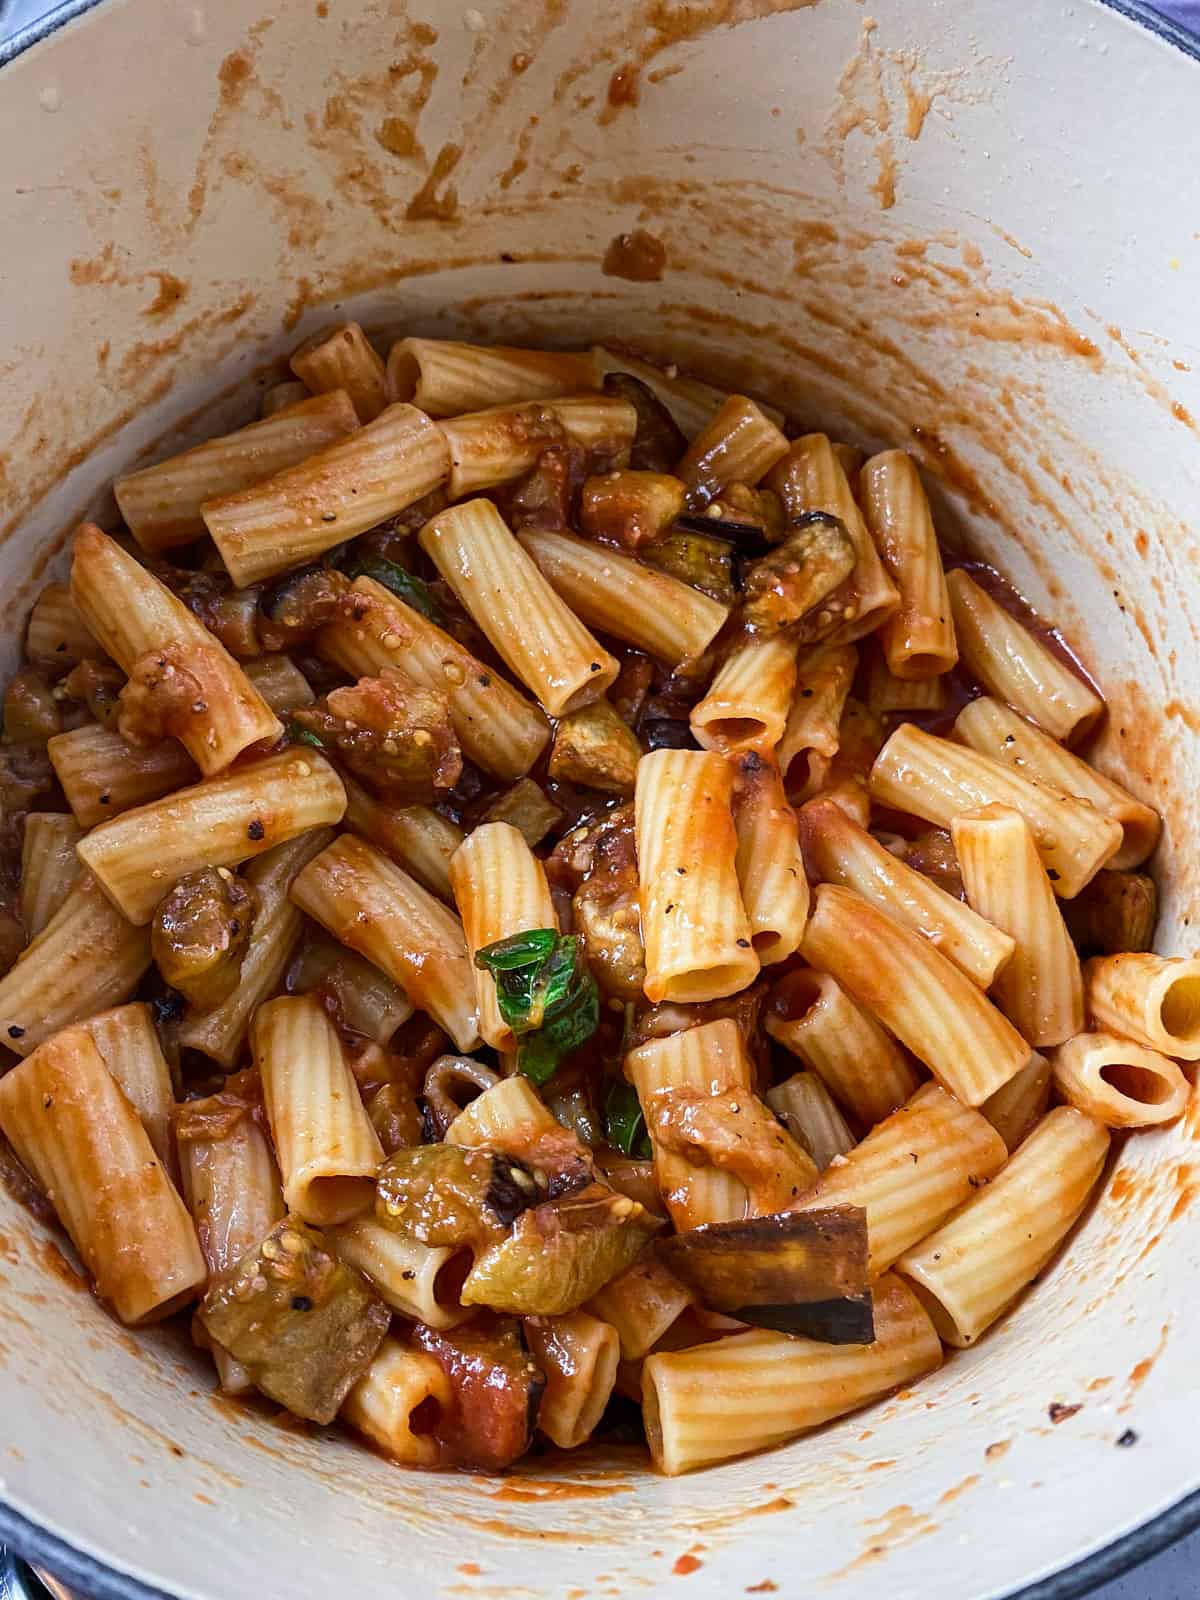 Mix the eggplant pasta together so all of the rigatoni noodles are evenly coated with the tomato sauce.